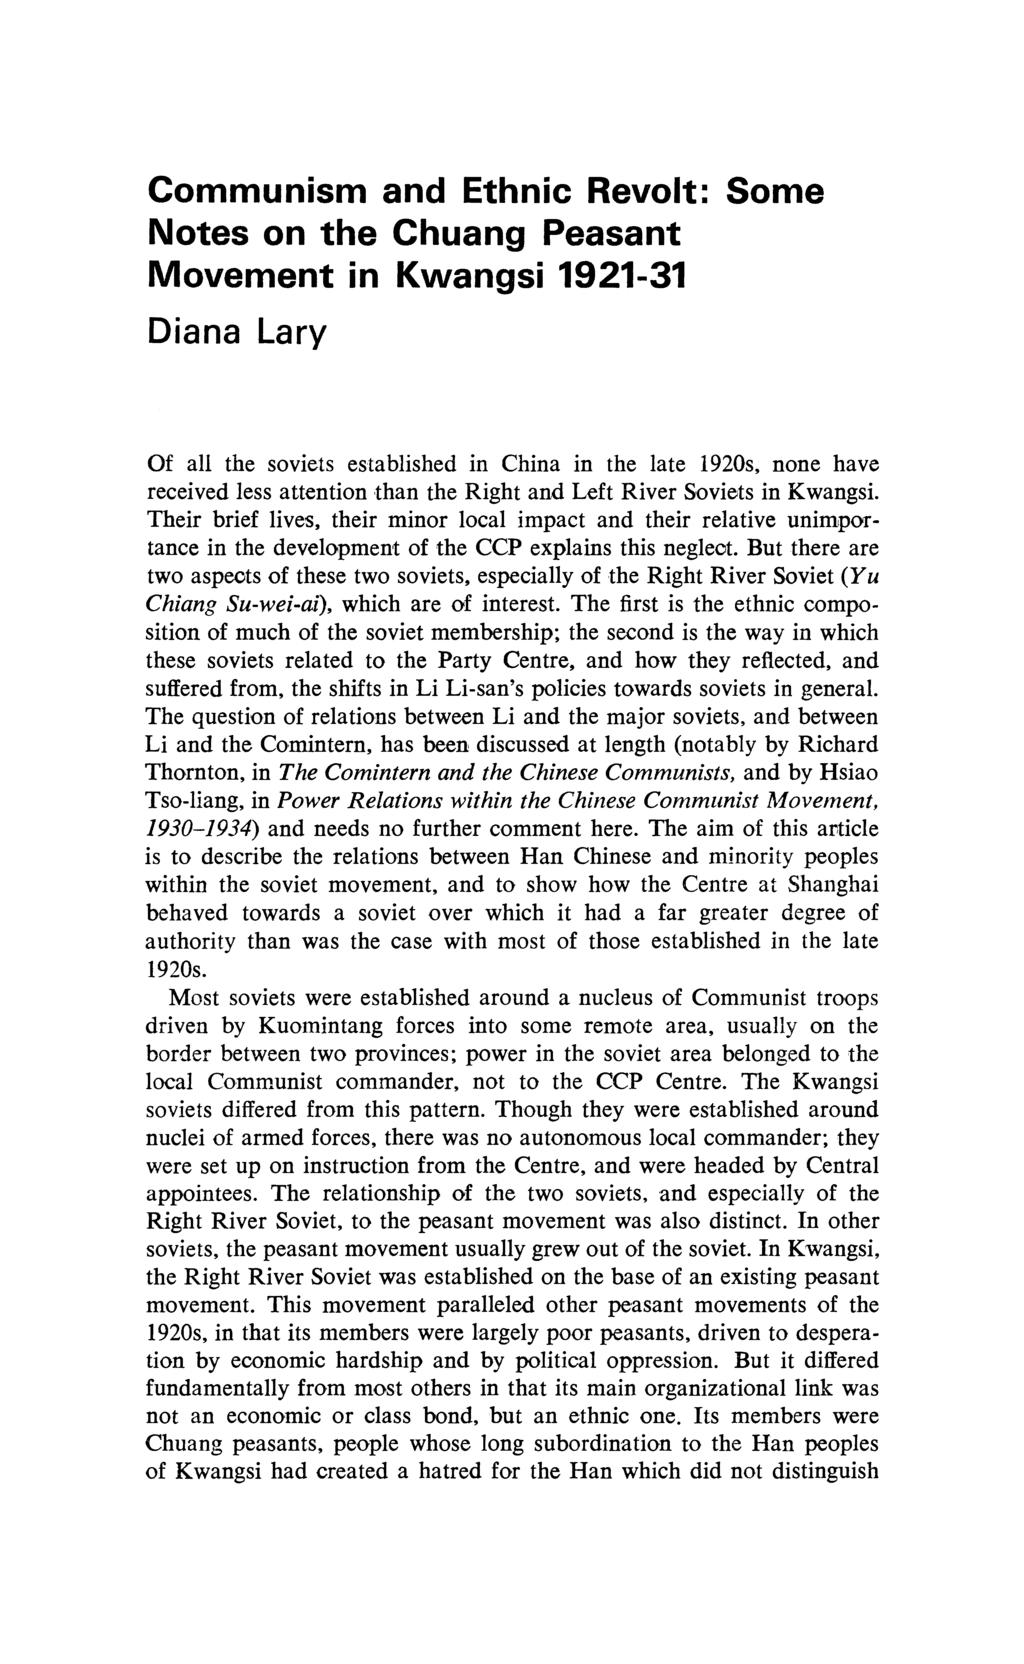 Communism and Ethnic Revolt: Some Notes on the Chuang Peasant Movement in Kwangsi 1921-31 Diana Lary Of all the soviets established in China in the late 1920s, none have received less attention than